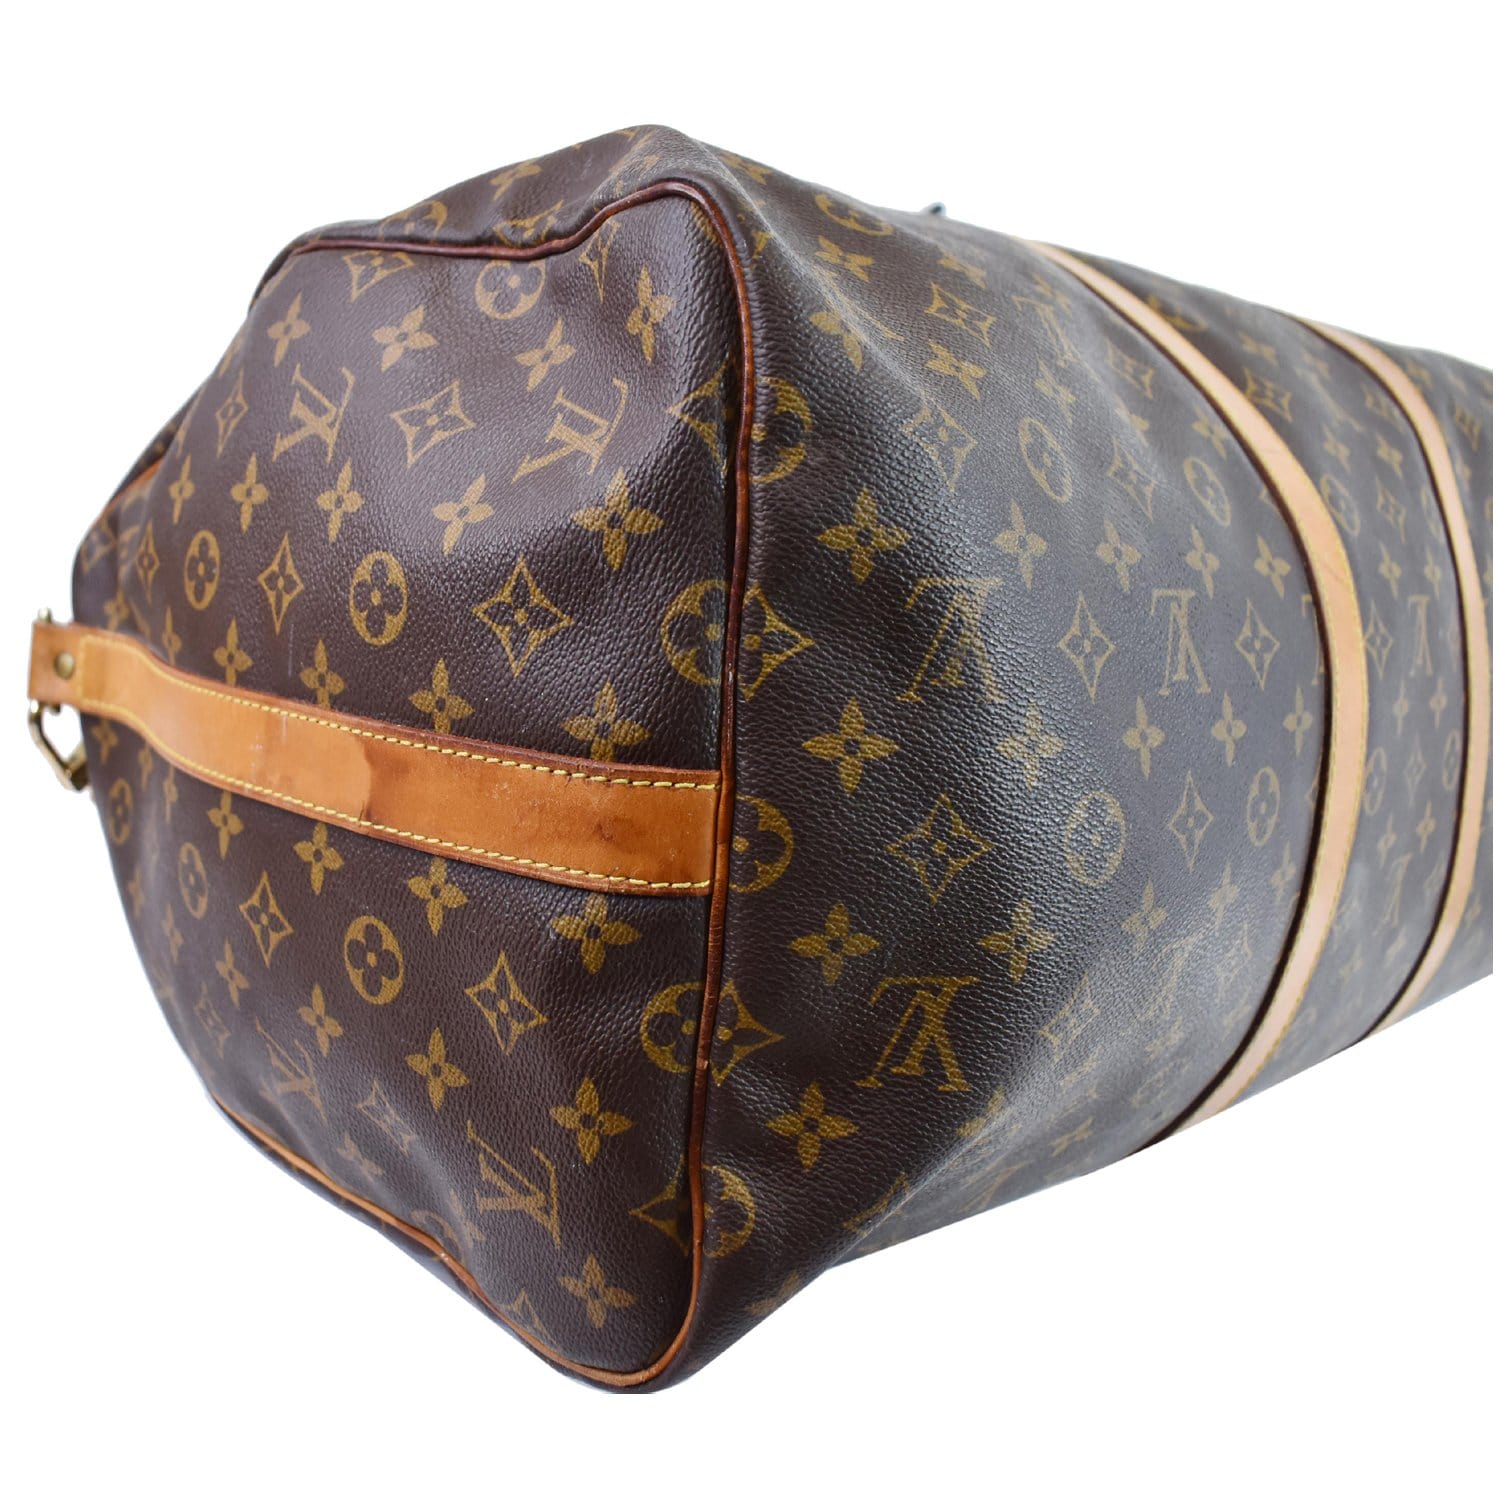 The smallest sized Keepall in Monogram canvas is the ideal travel  companion. Its supple an…